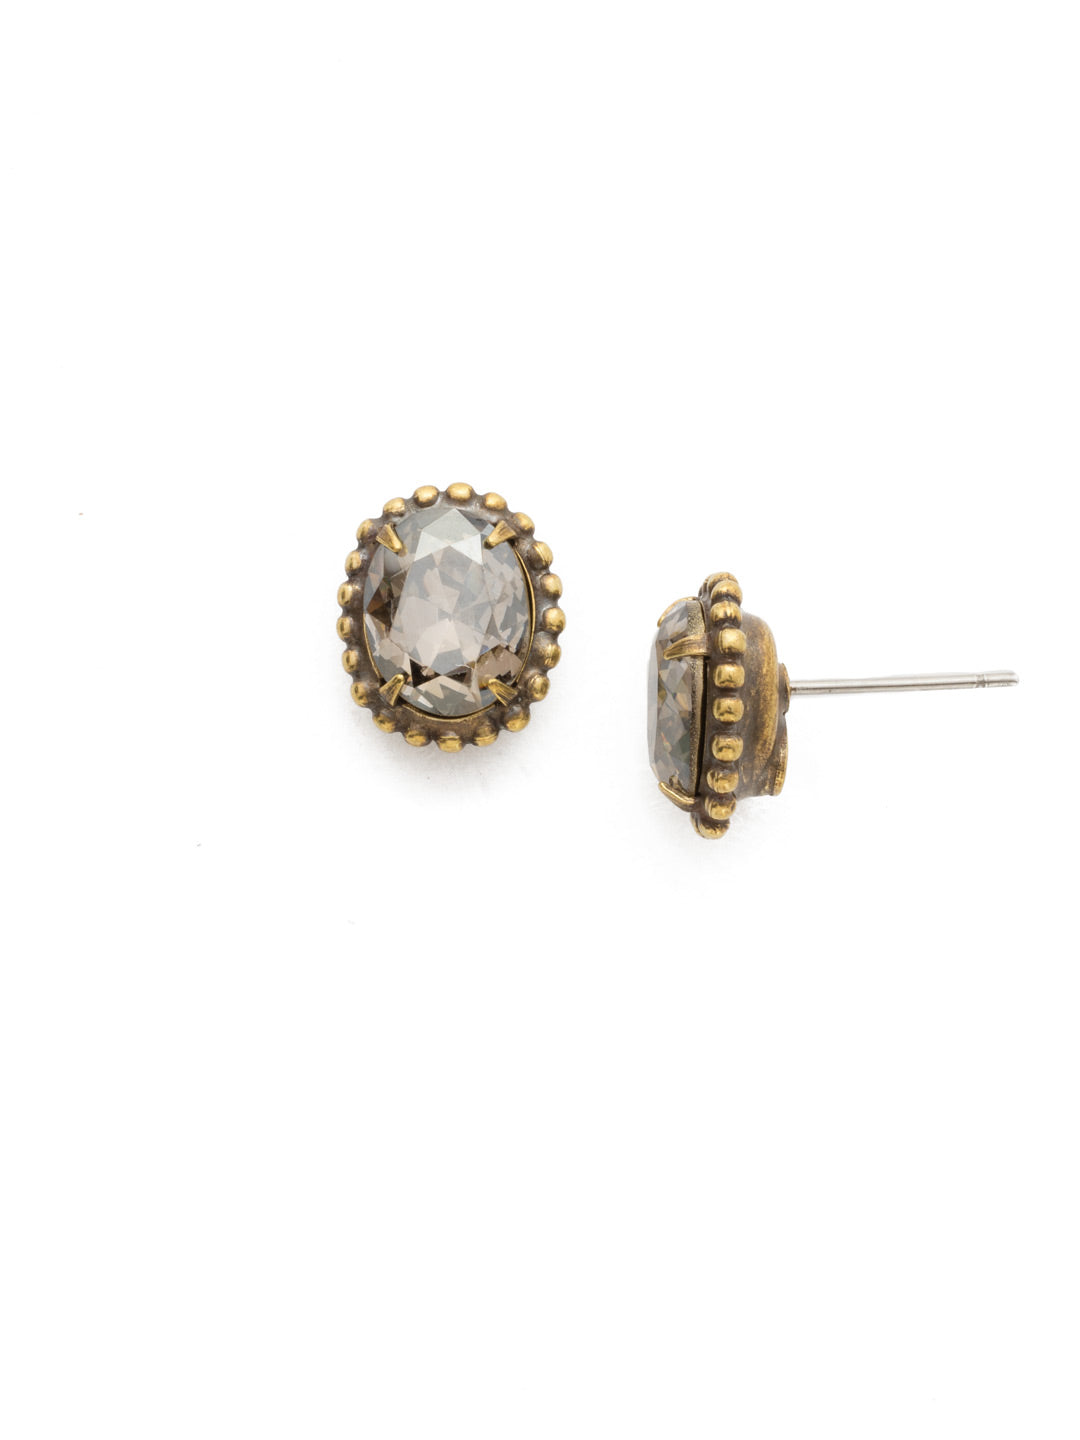 Oval-Cut Solitaire Stud Earrings - EDQ10AGWW - These simple stud earrings feature a beautiful oval crystal surrounded by a decorative edged border.